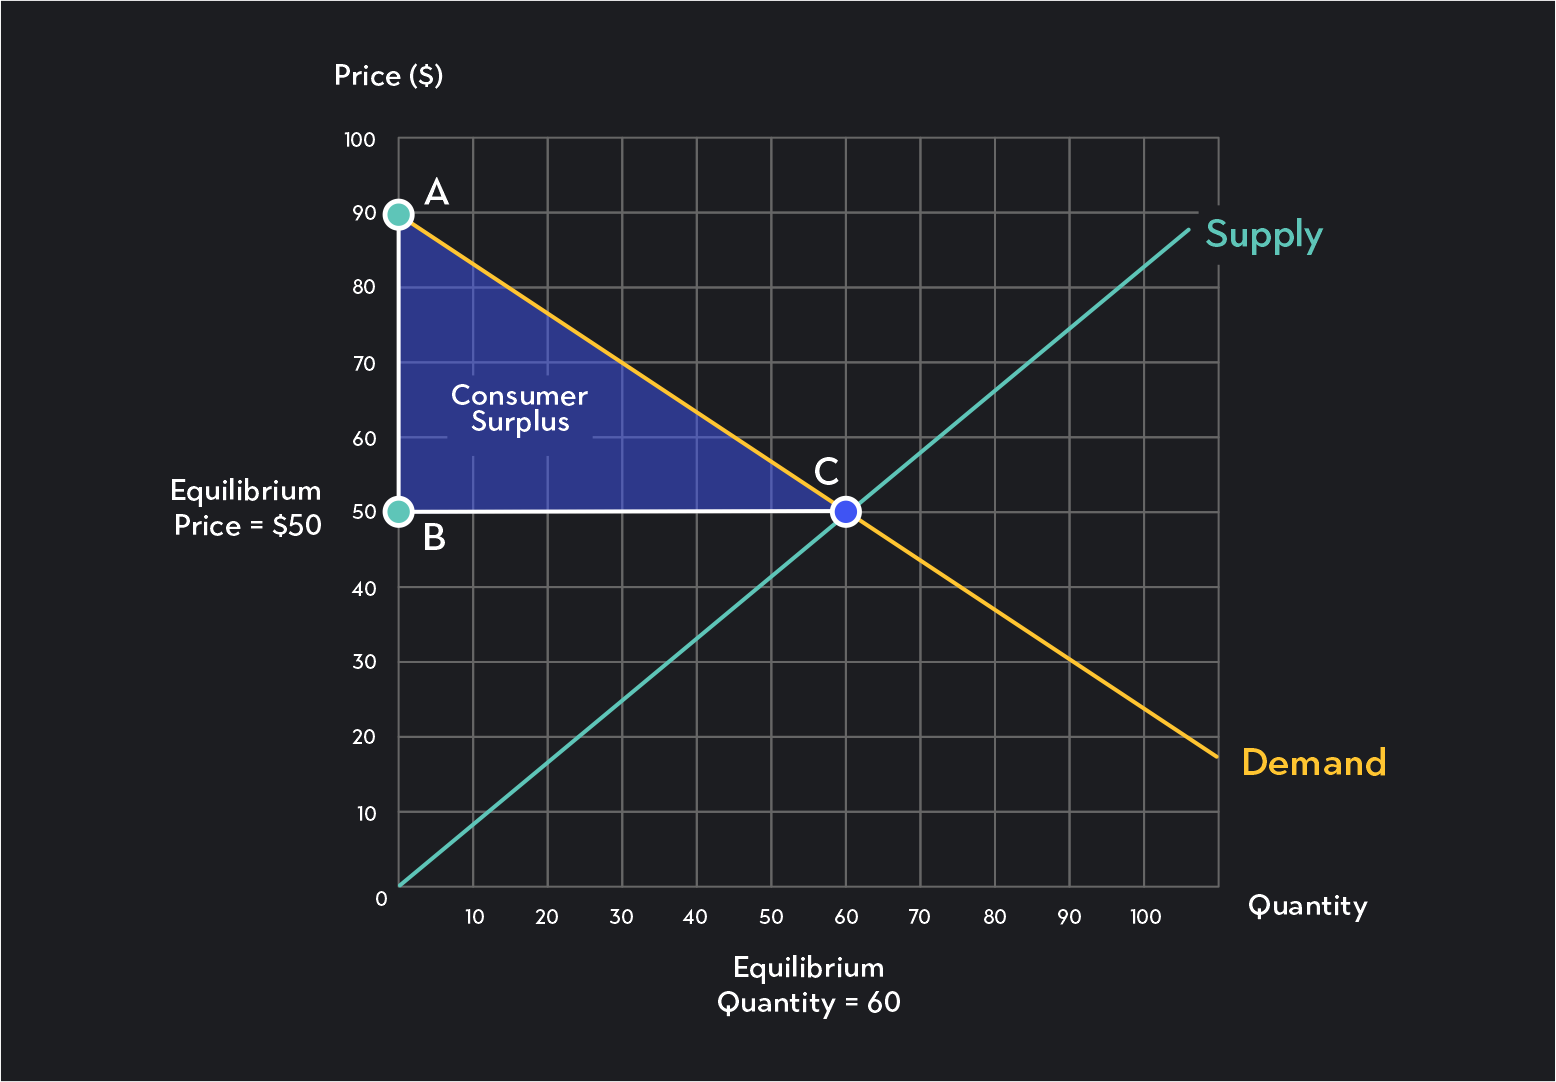 a supply and demand graph with linear supply and demand curves and a triangle representing consumer surplus